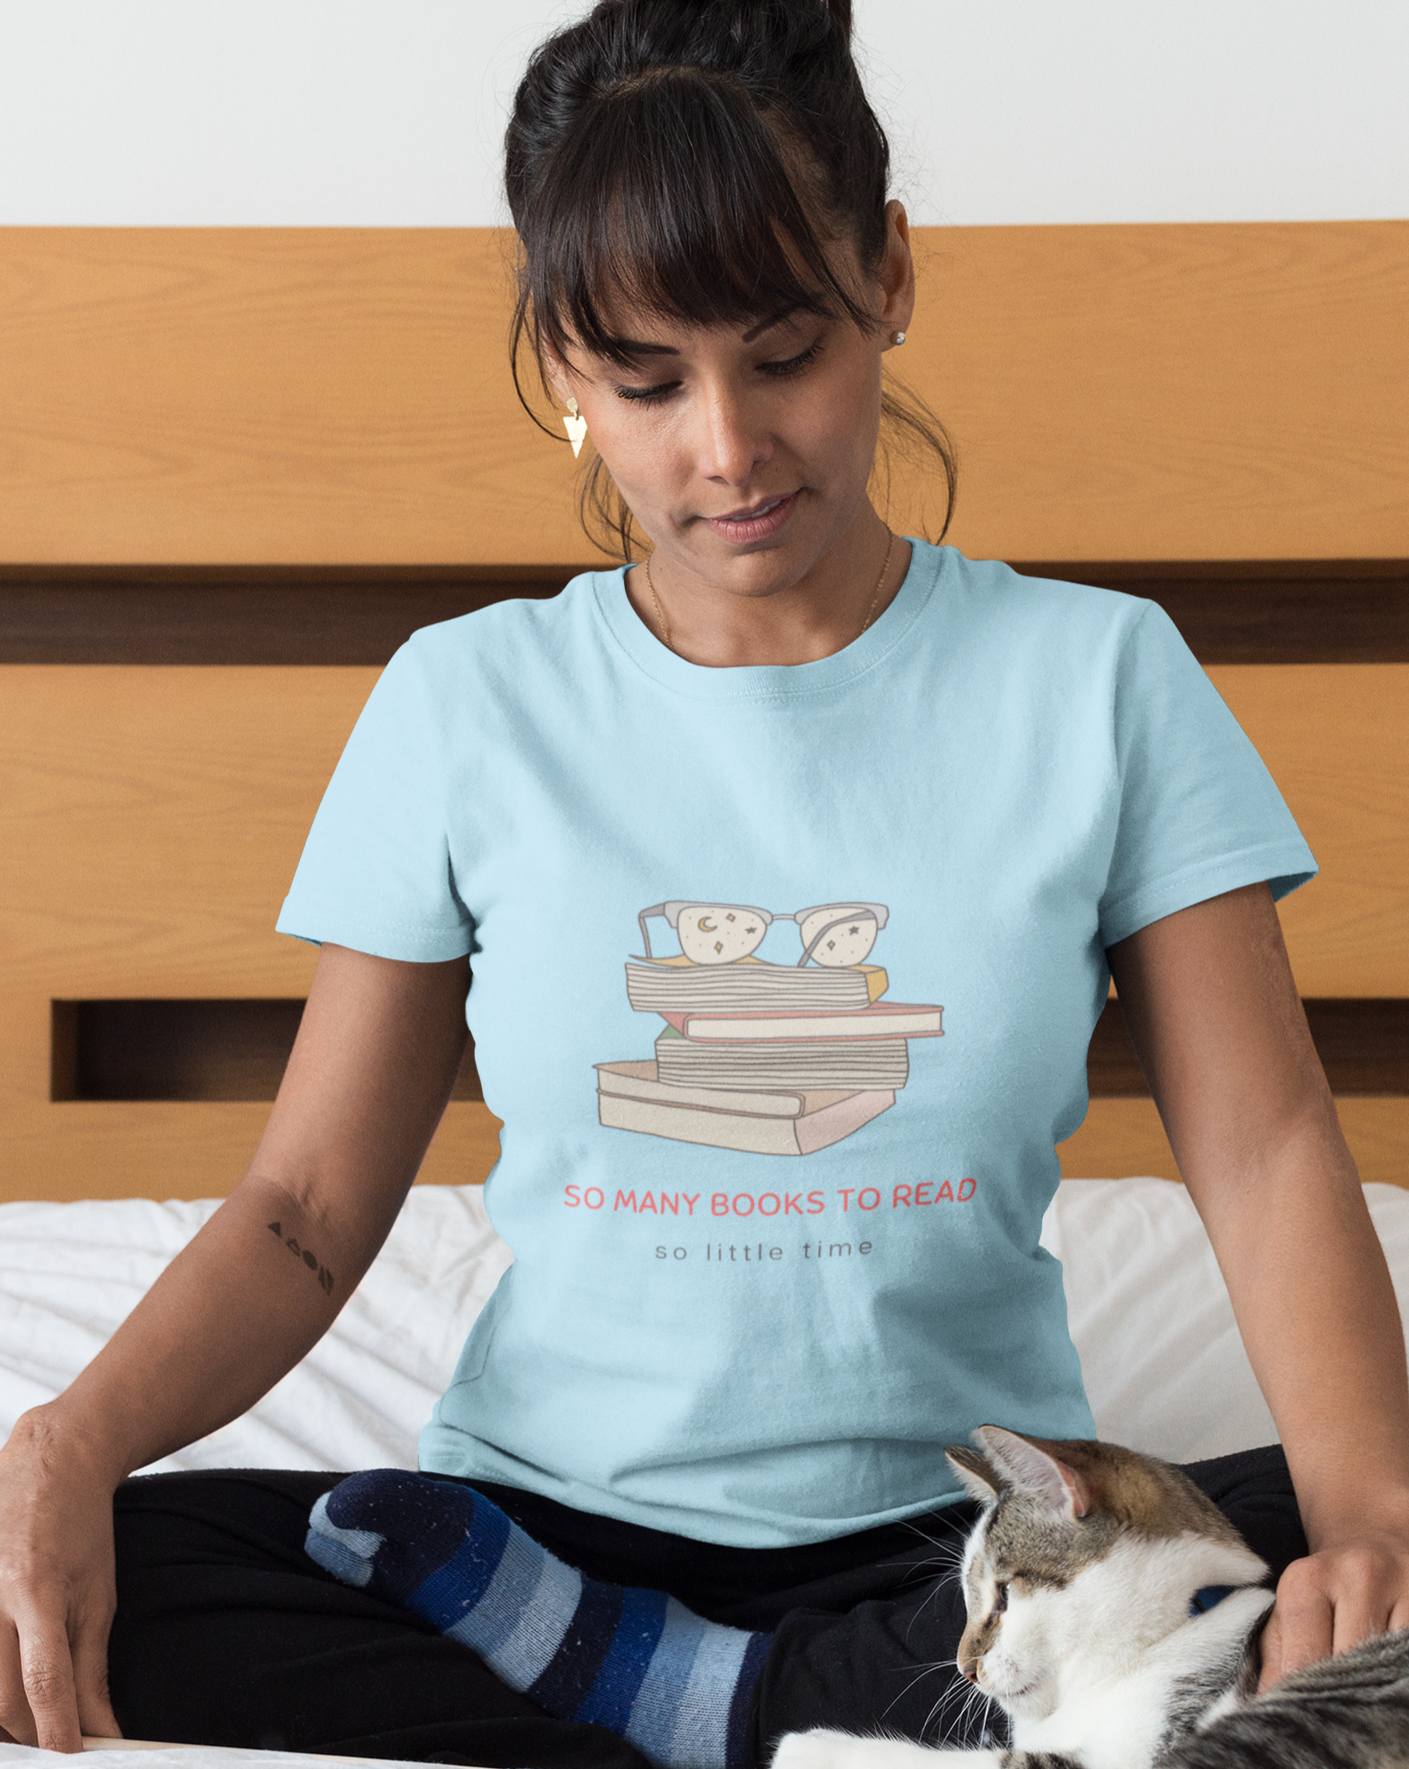 To all the book lovers out there, this t-shirt is for you! Inspired by bookworms everywhere, this cotton t-shirt has a cute book design with the phrase “So Many Books To Read So Little Time”. Made with a super soft cotton, this stylish t-shirt is great for snuggling up on the couch with a new book in hand. This is a great gift idea for your bookclub or anyone who is a reader.